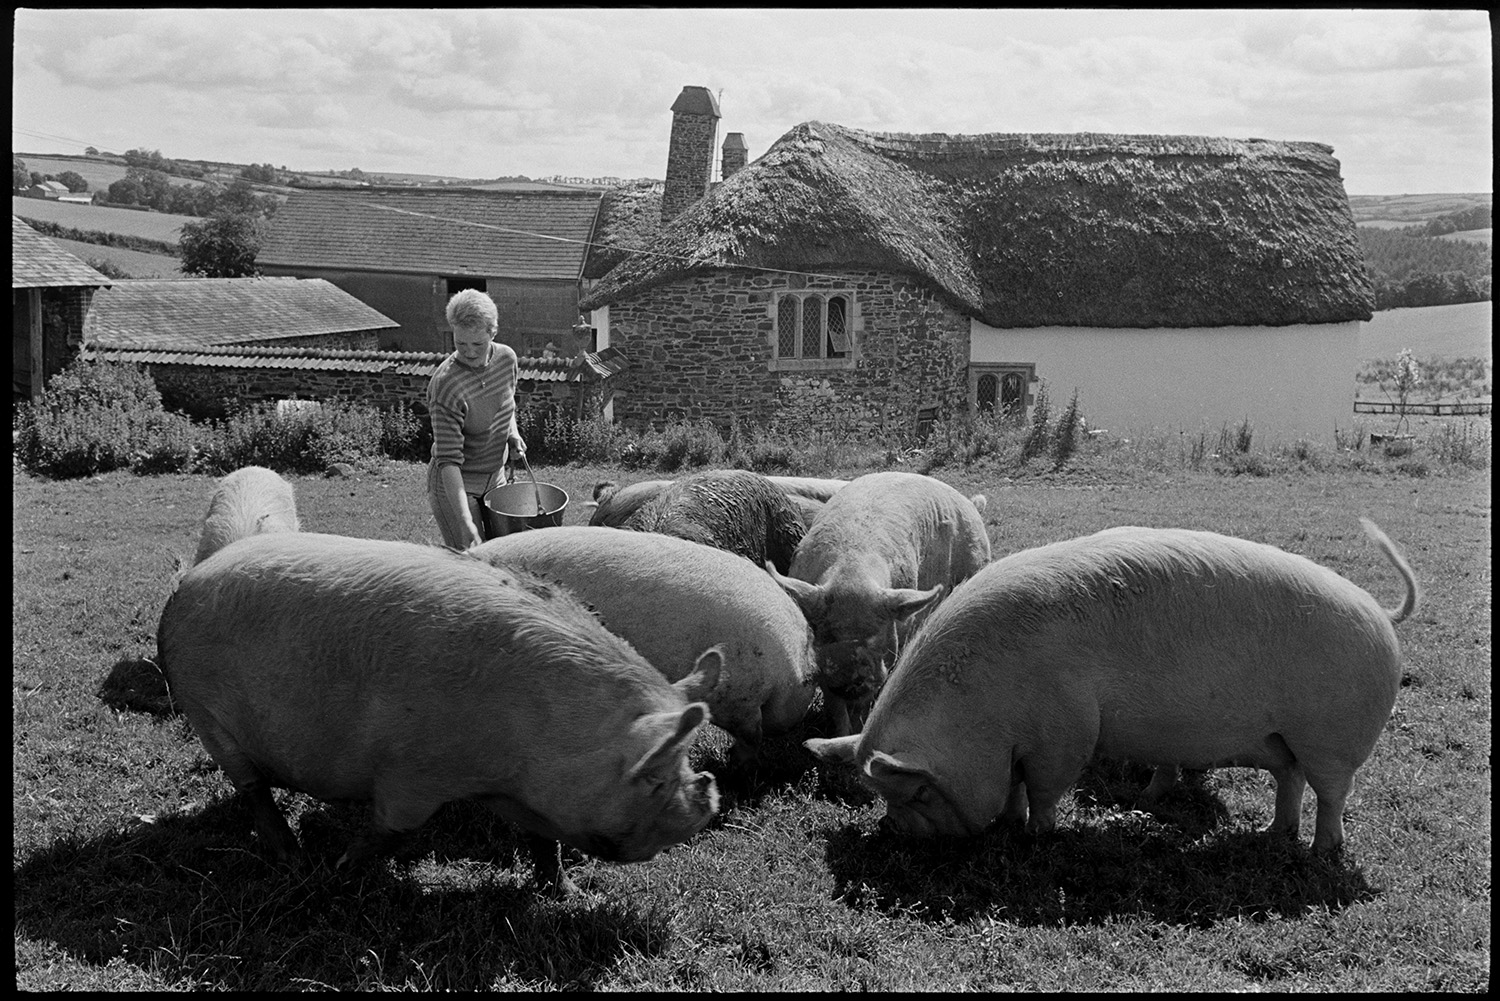 Woman farmer feeding Chinese pigs. 
[Anne Petch feeding Chinese pigs in a field at Heal Farm, Kings Nympton. A thatched farmhouse and other farm buildings are visible in the background.]